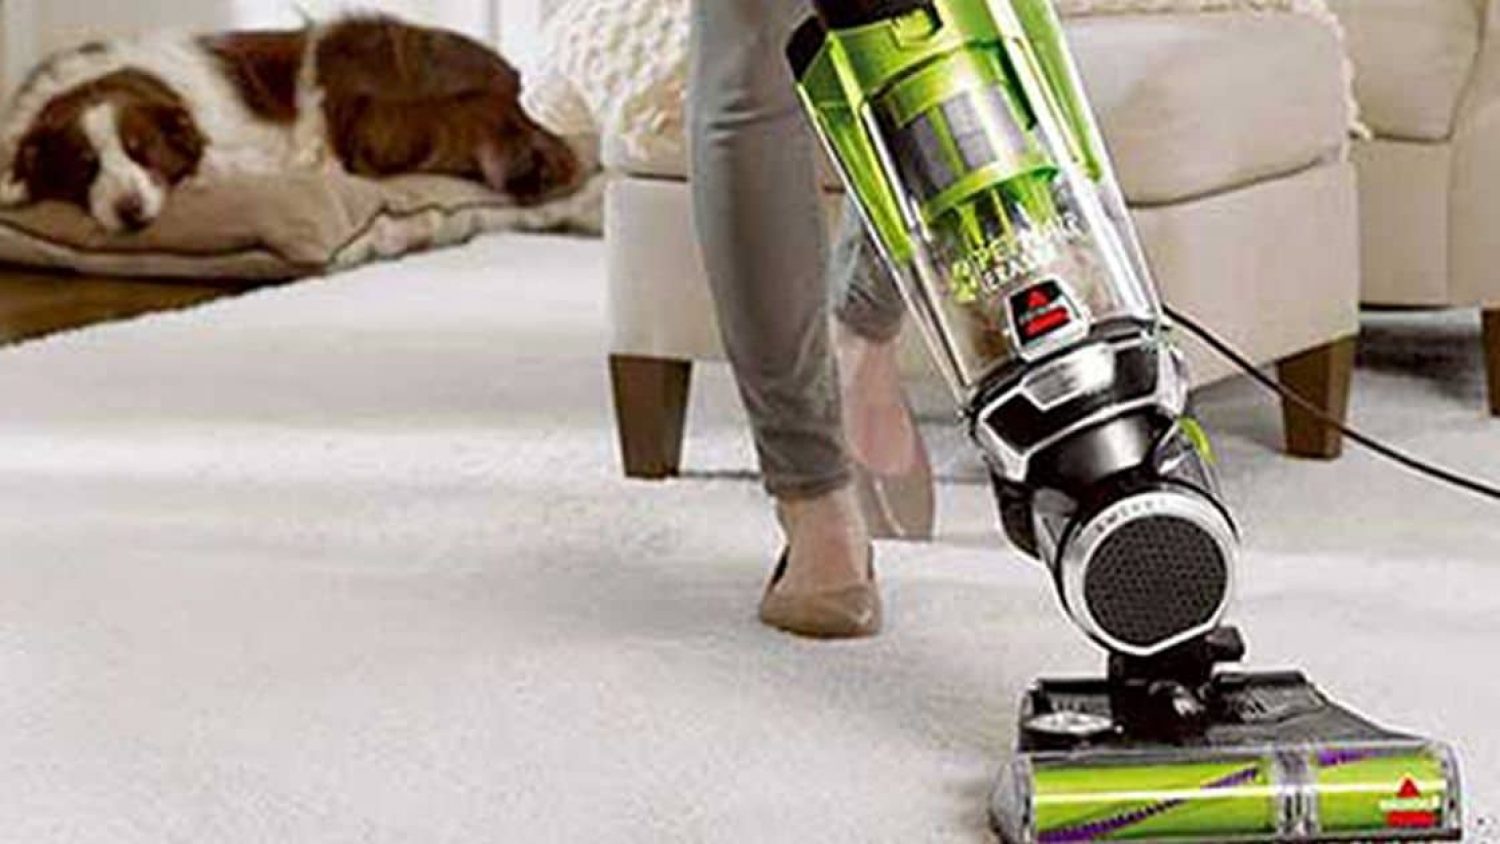 Best Vacuum Cleaner for Pet Hair: Make Your Home Pet-Hair Free With These 5 Amazing Vacuums